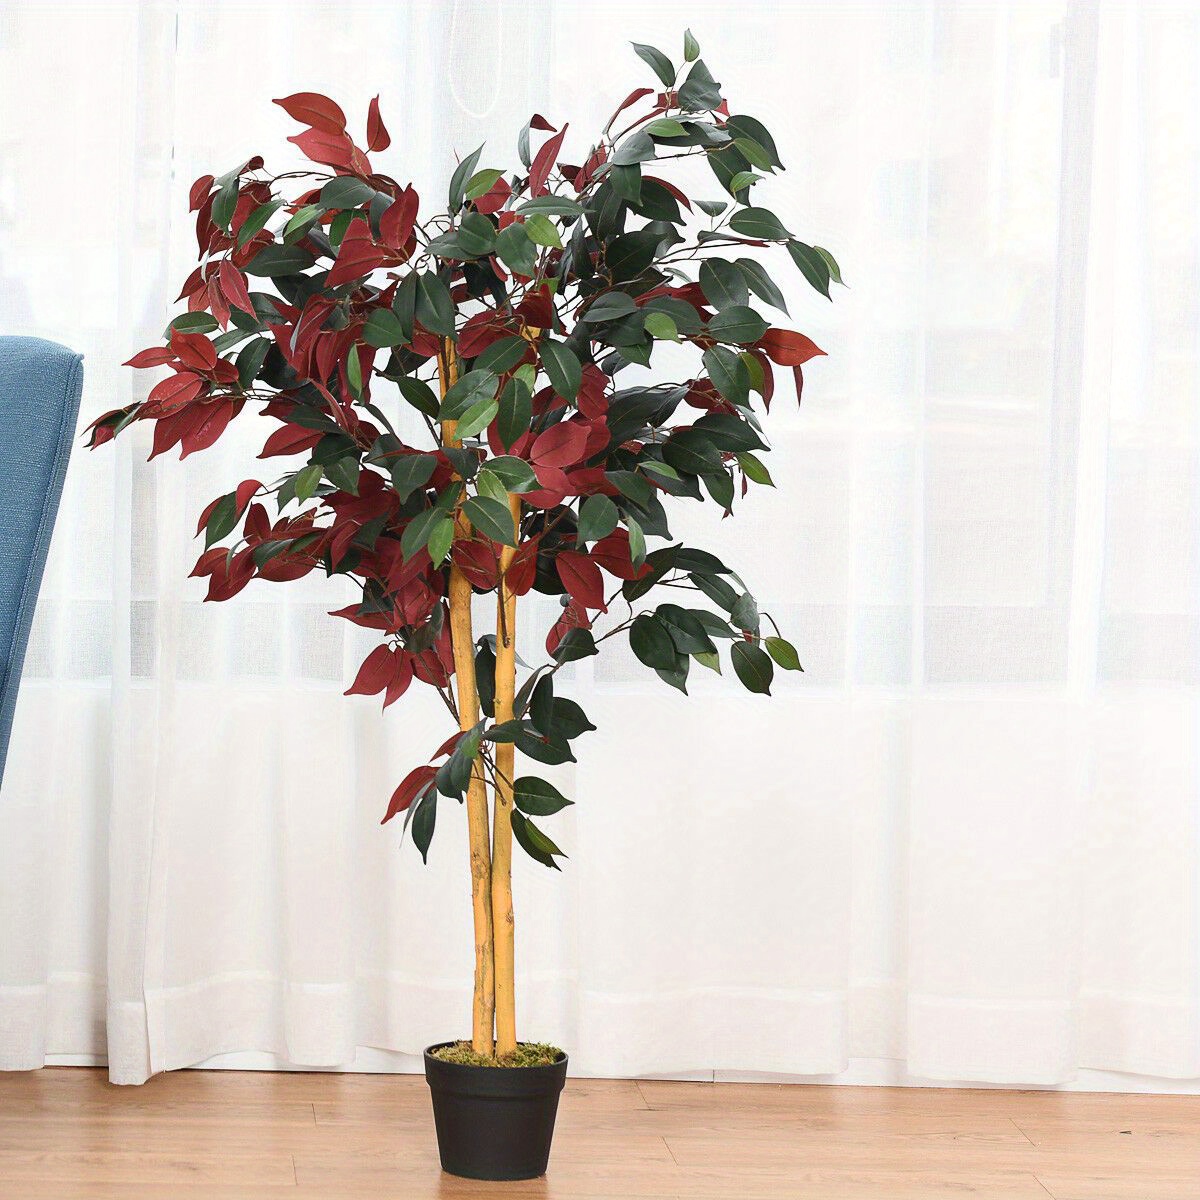 

Goplus 4-feet Artificial Capensia Bush Red/ Green Leaves Indoor-outdoor Home Decoration